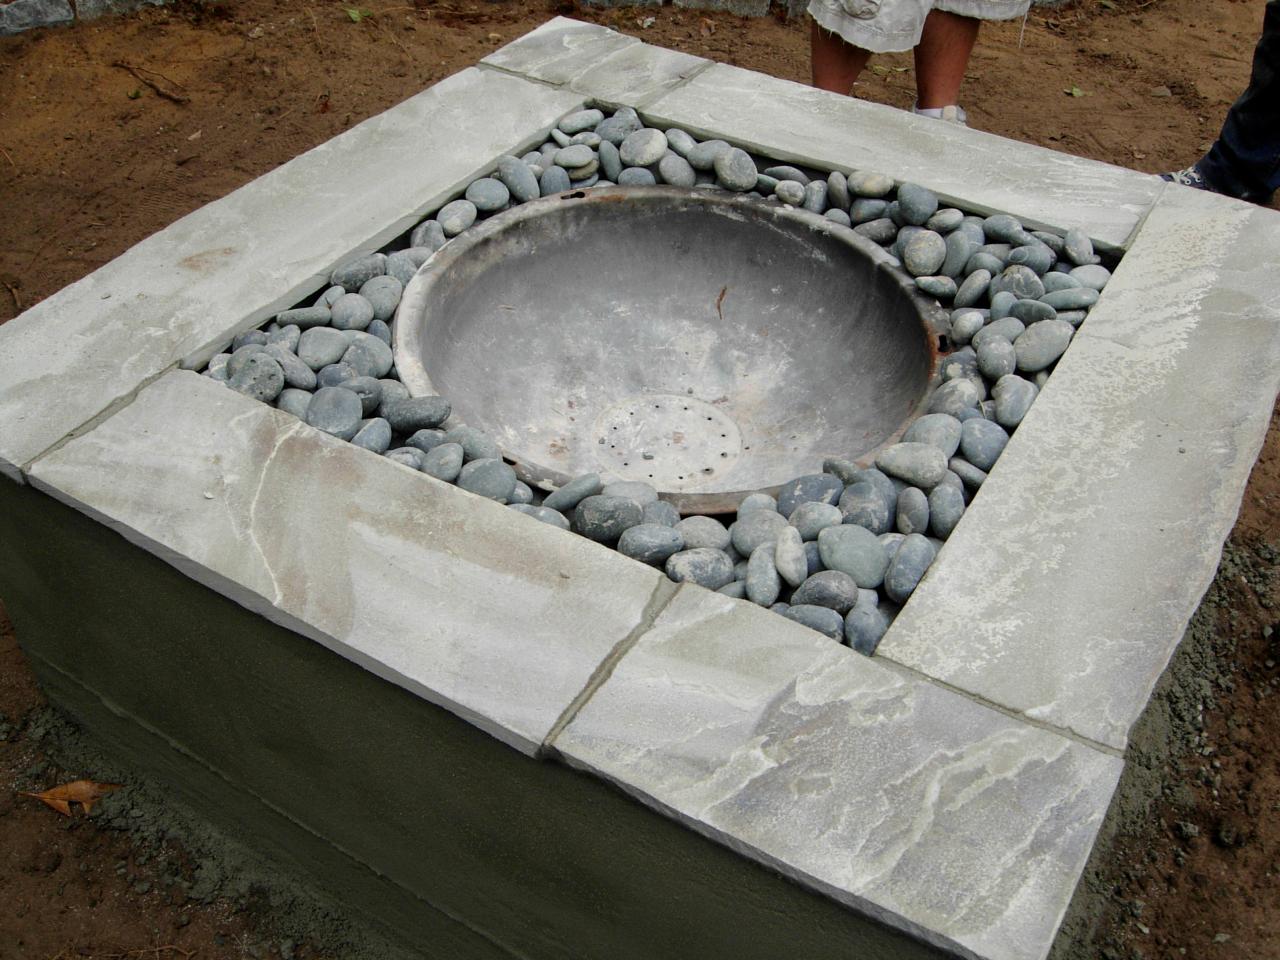 How to Make a Concrete Fire Feature | HGTV